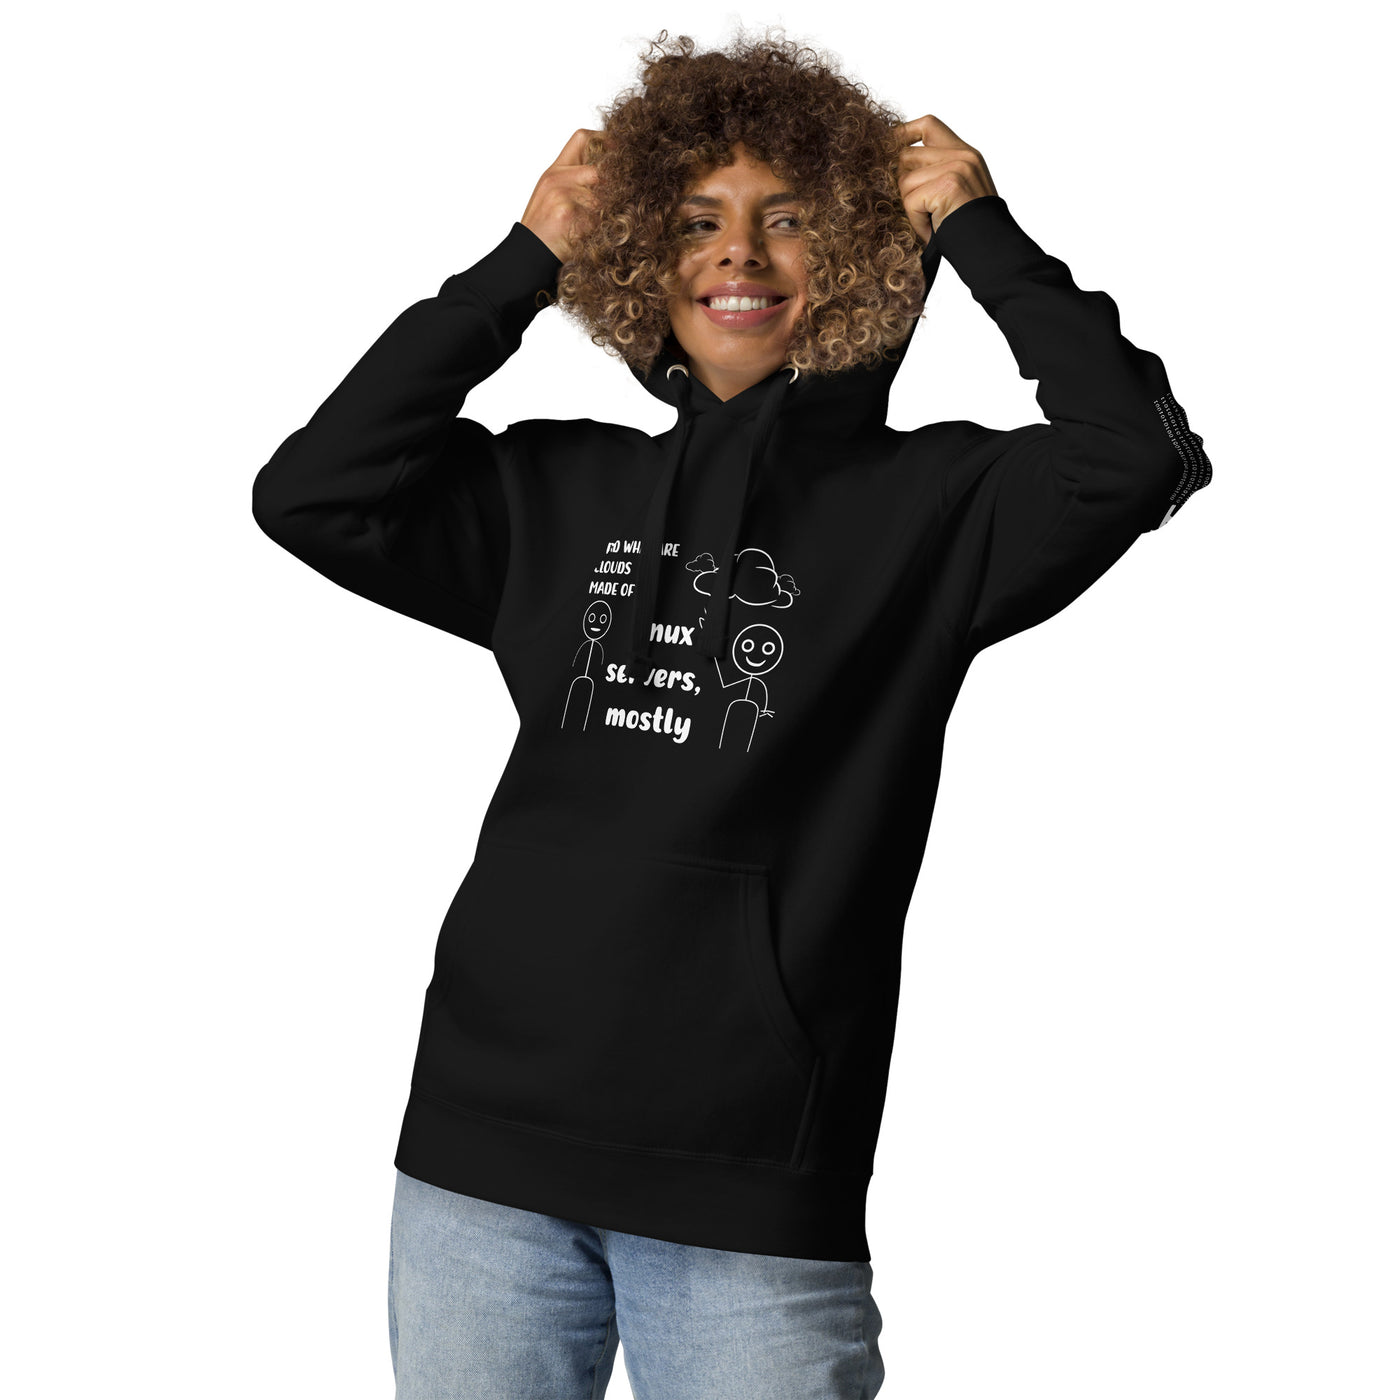 Dad, What are clouds made of - Unisex Hoodie